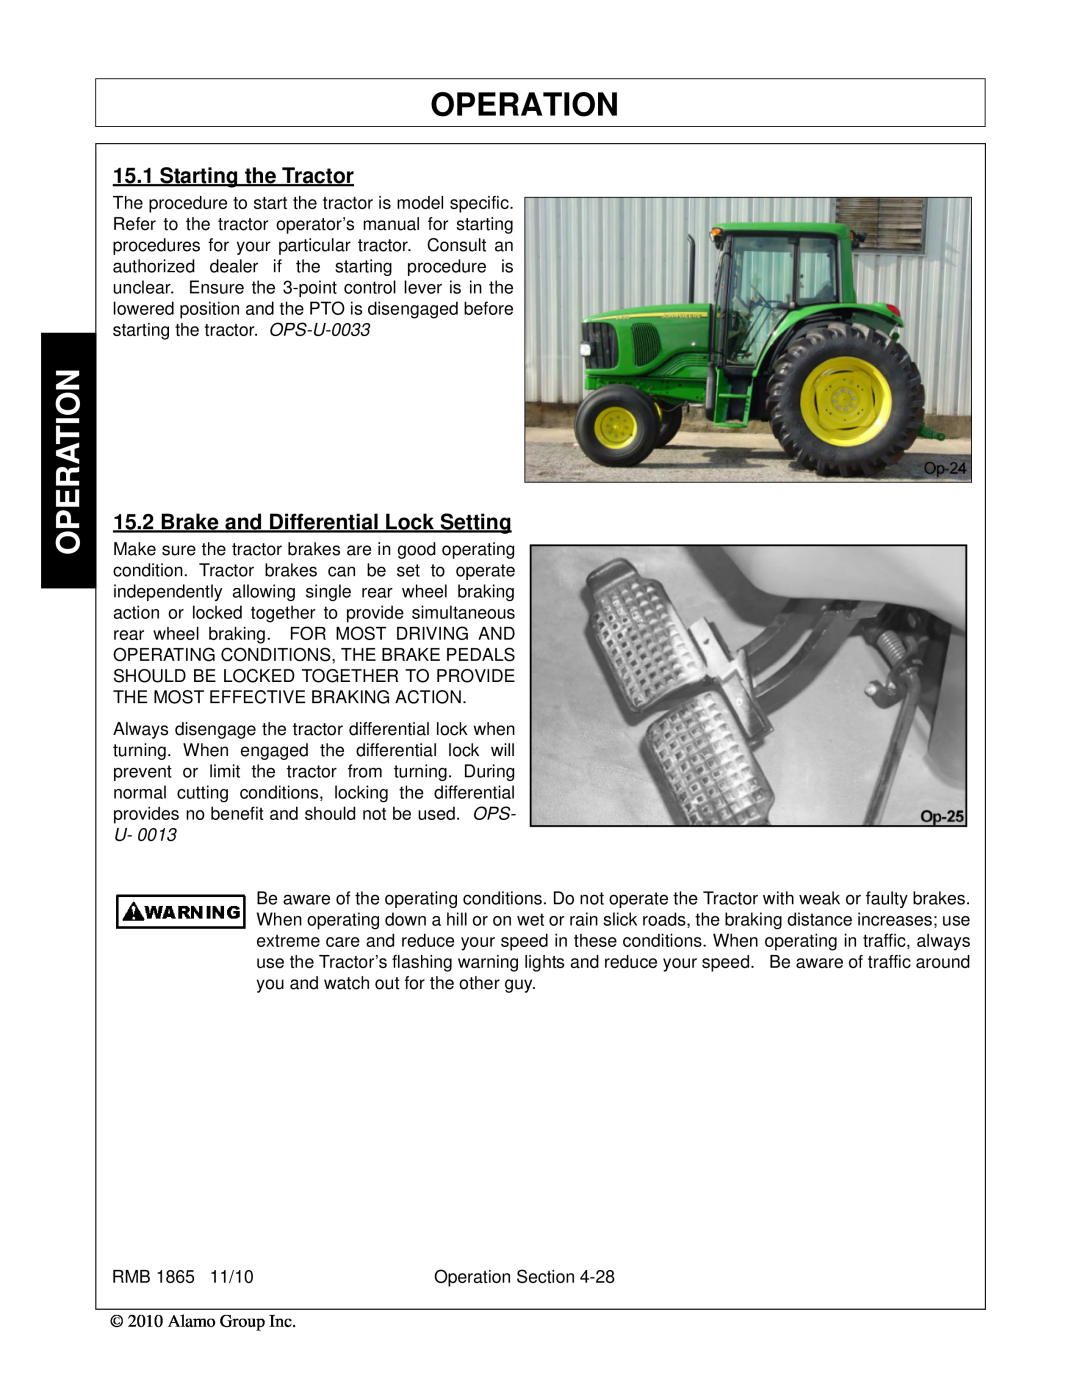 Bush Hog RMB 1865 manual Operation, Starting the Tractor, Brake and Differential Lock Setting 